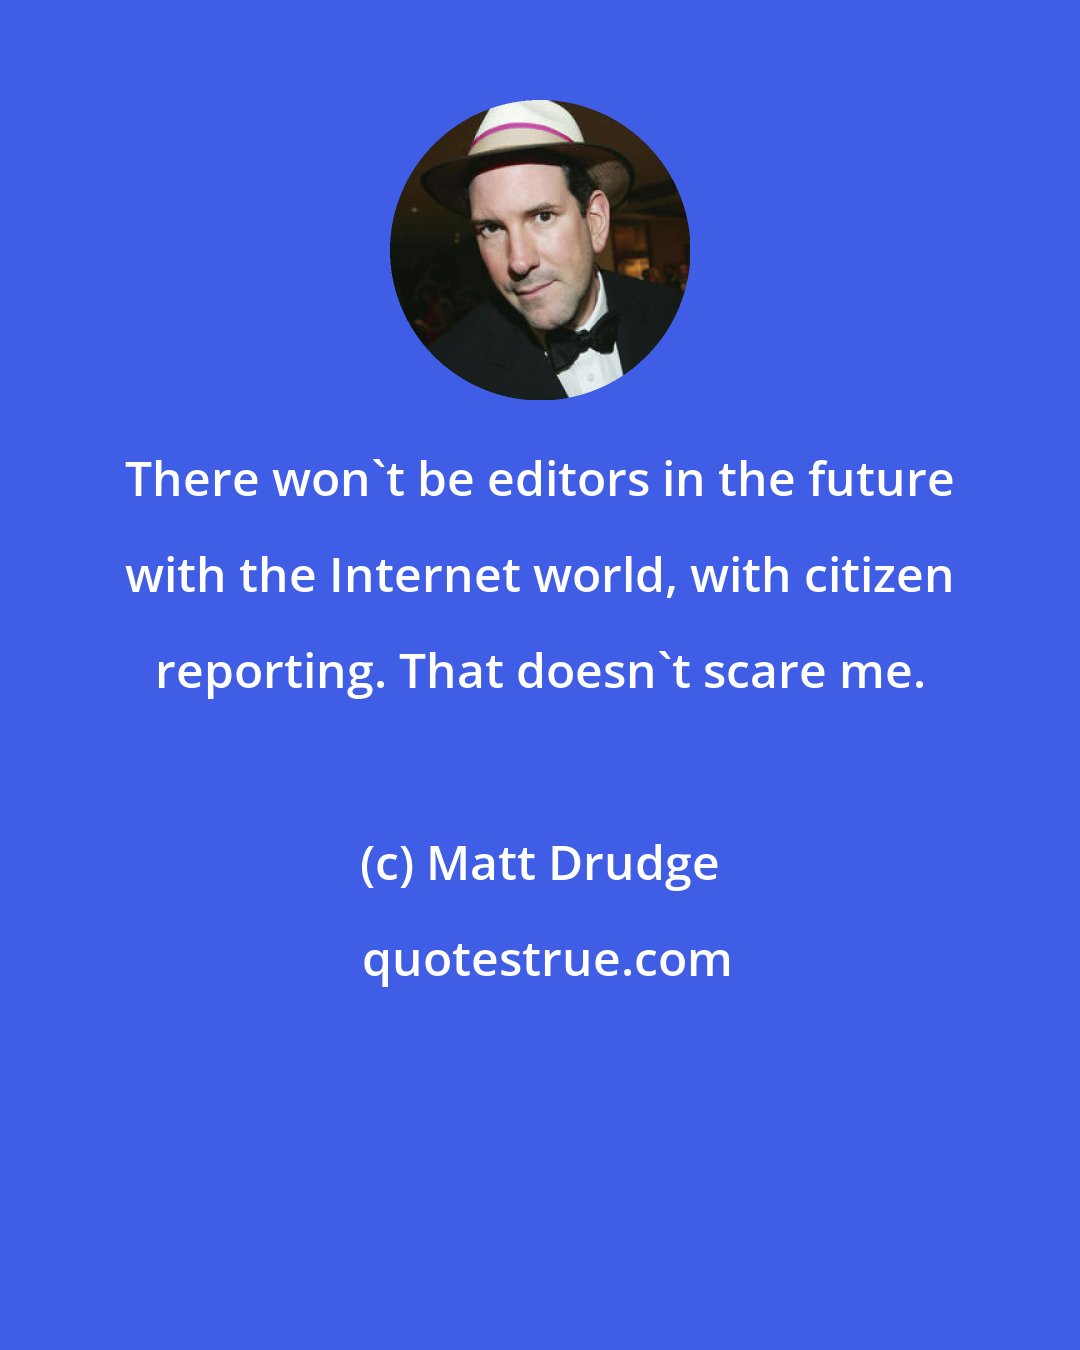 Matt Drudge: There won't be editors in the future with the Internet world, with citizen reporting. That doesn't scare me.